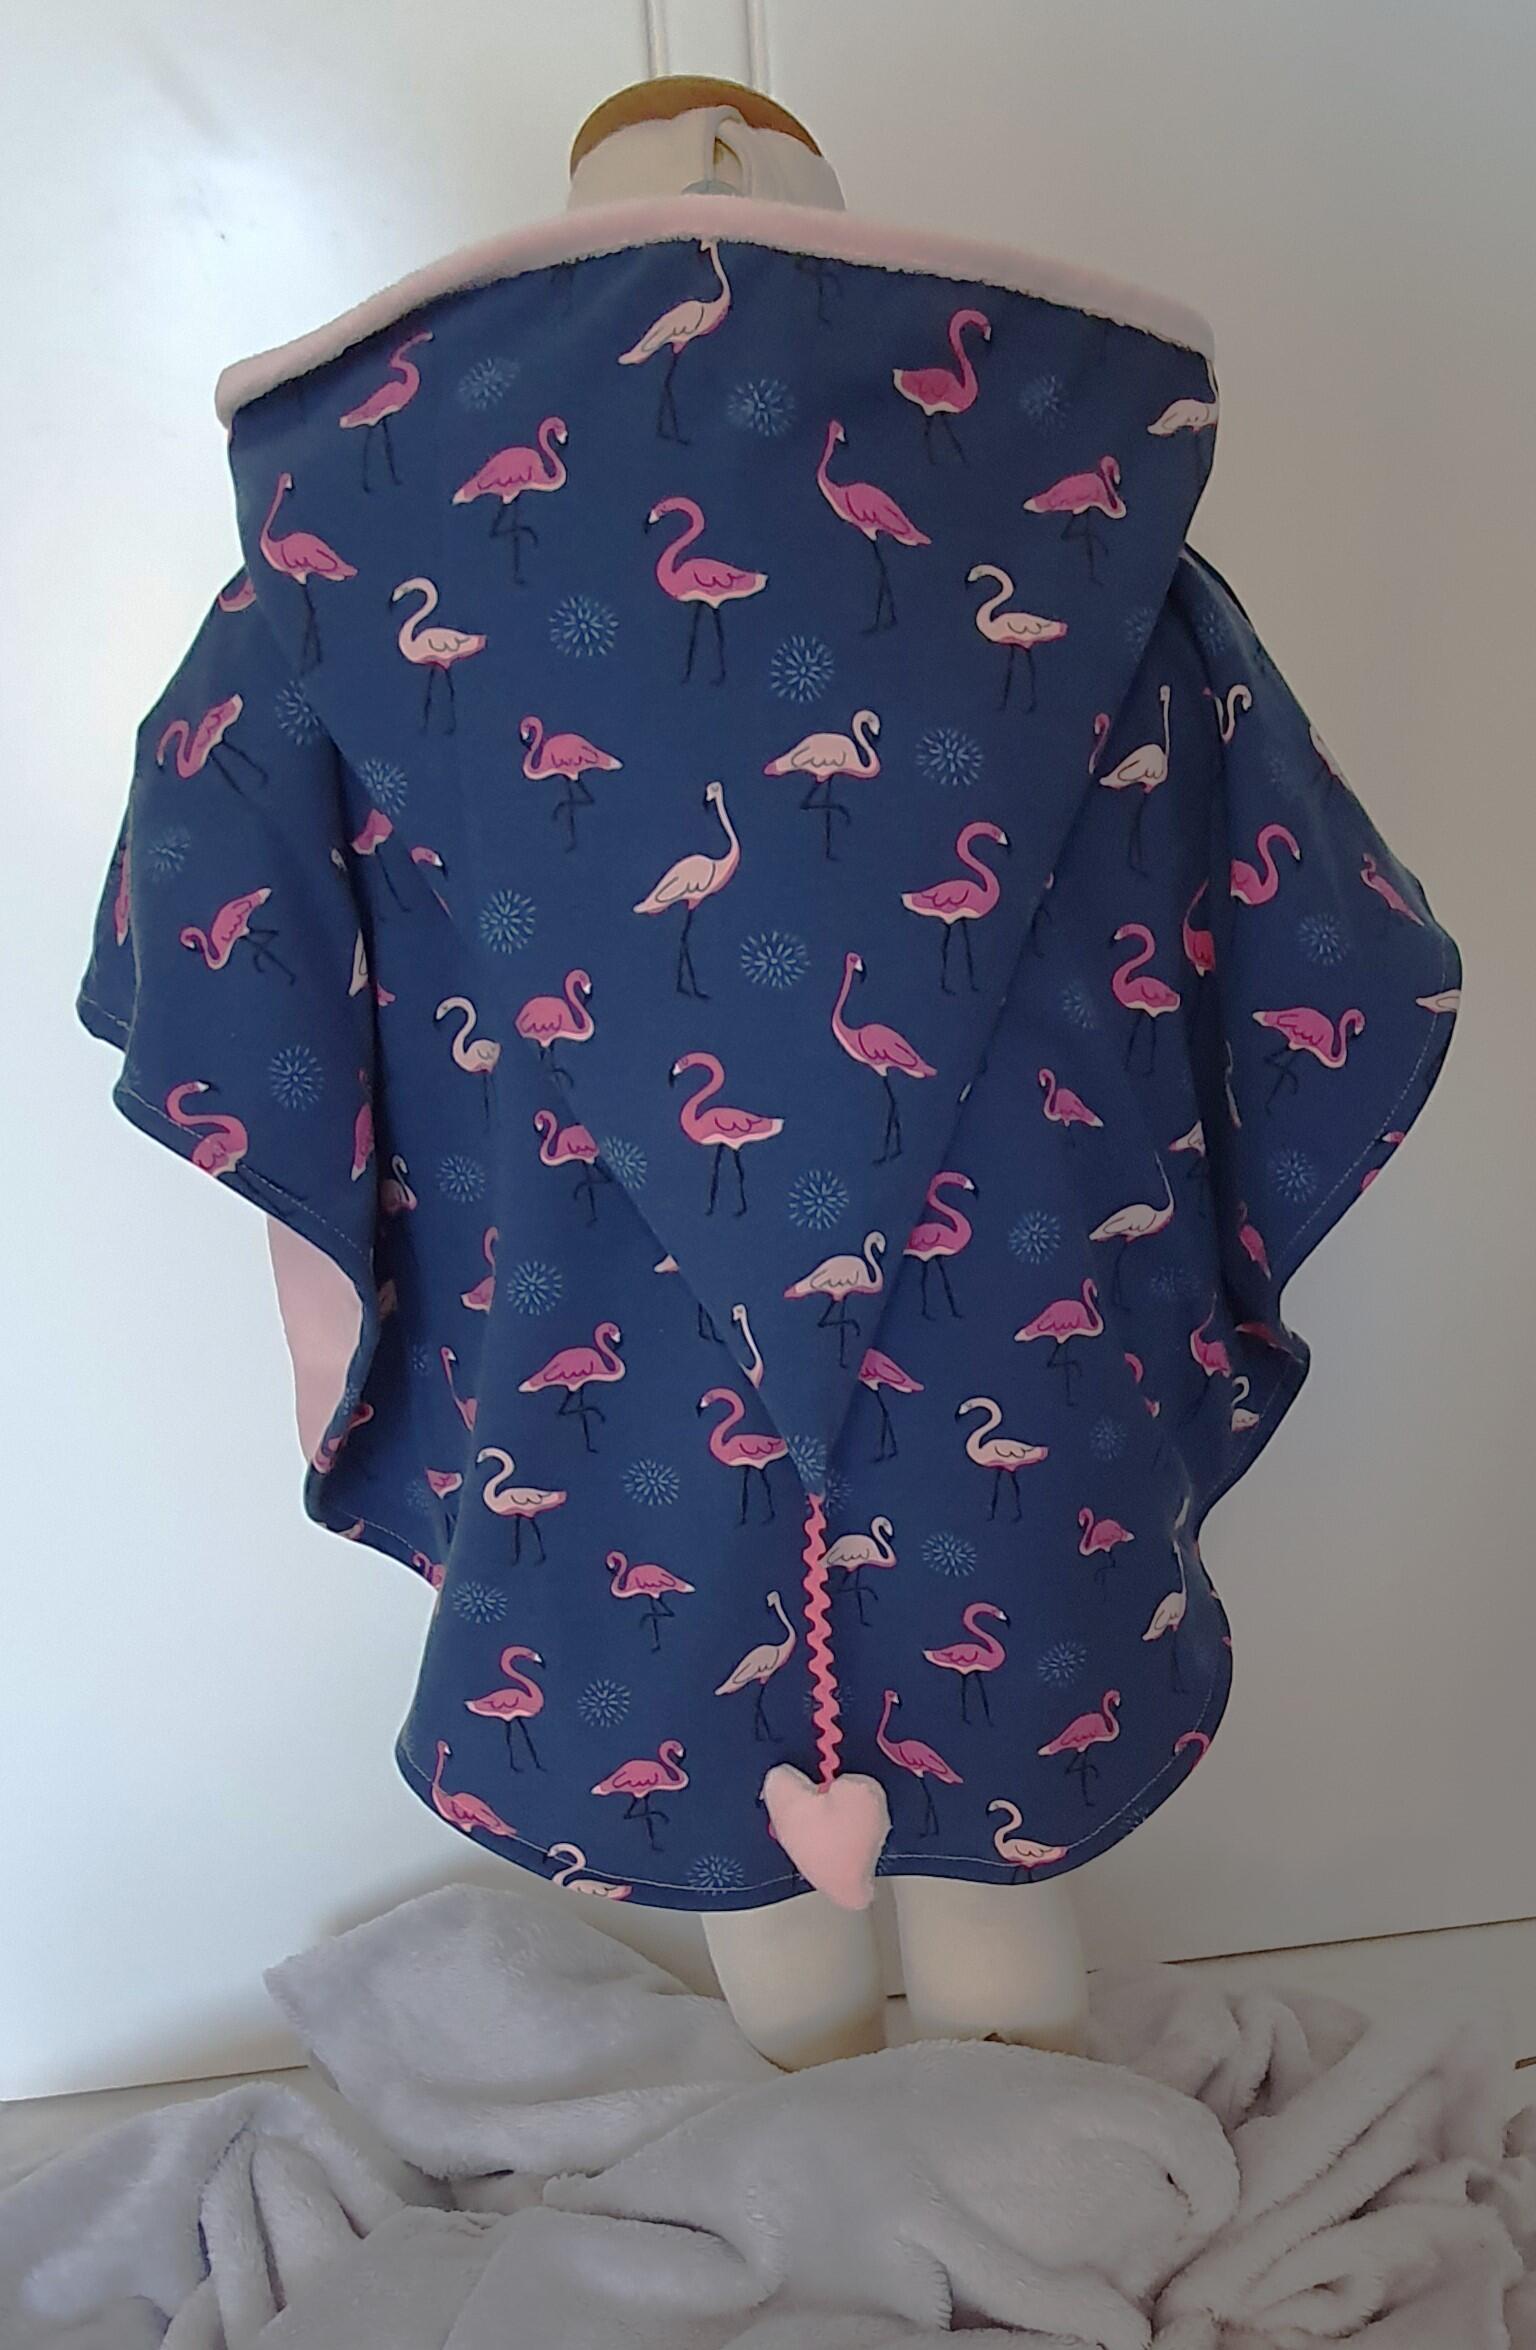 Cape/manteau réversible "Flamingos blue" made in Luxembourg 